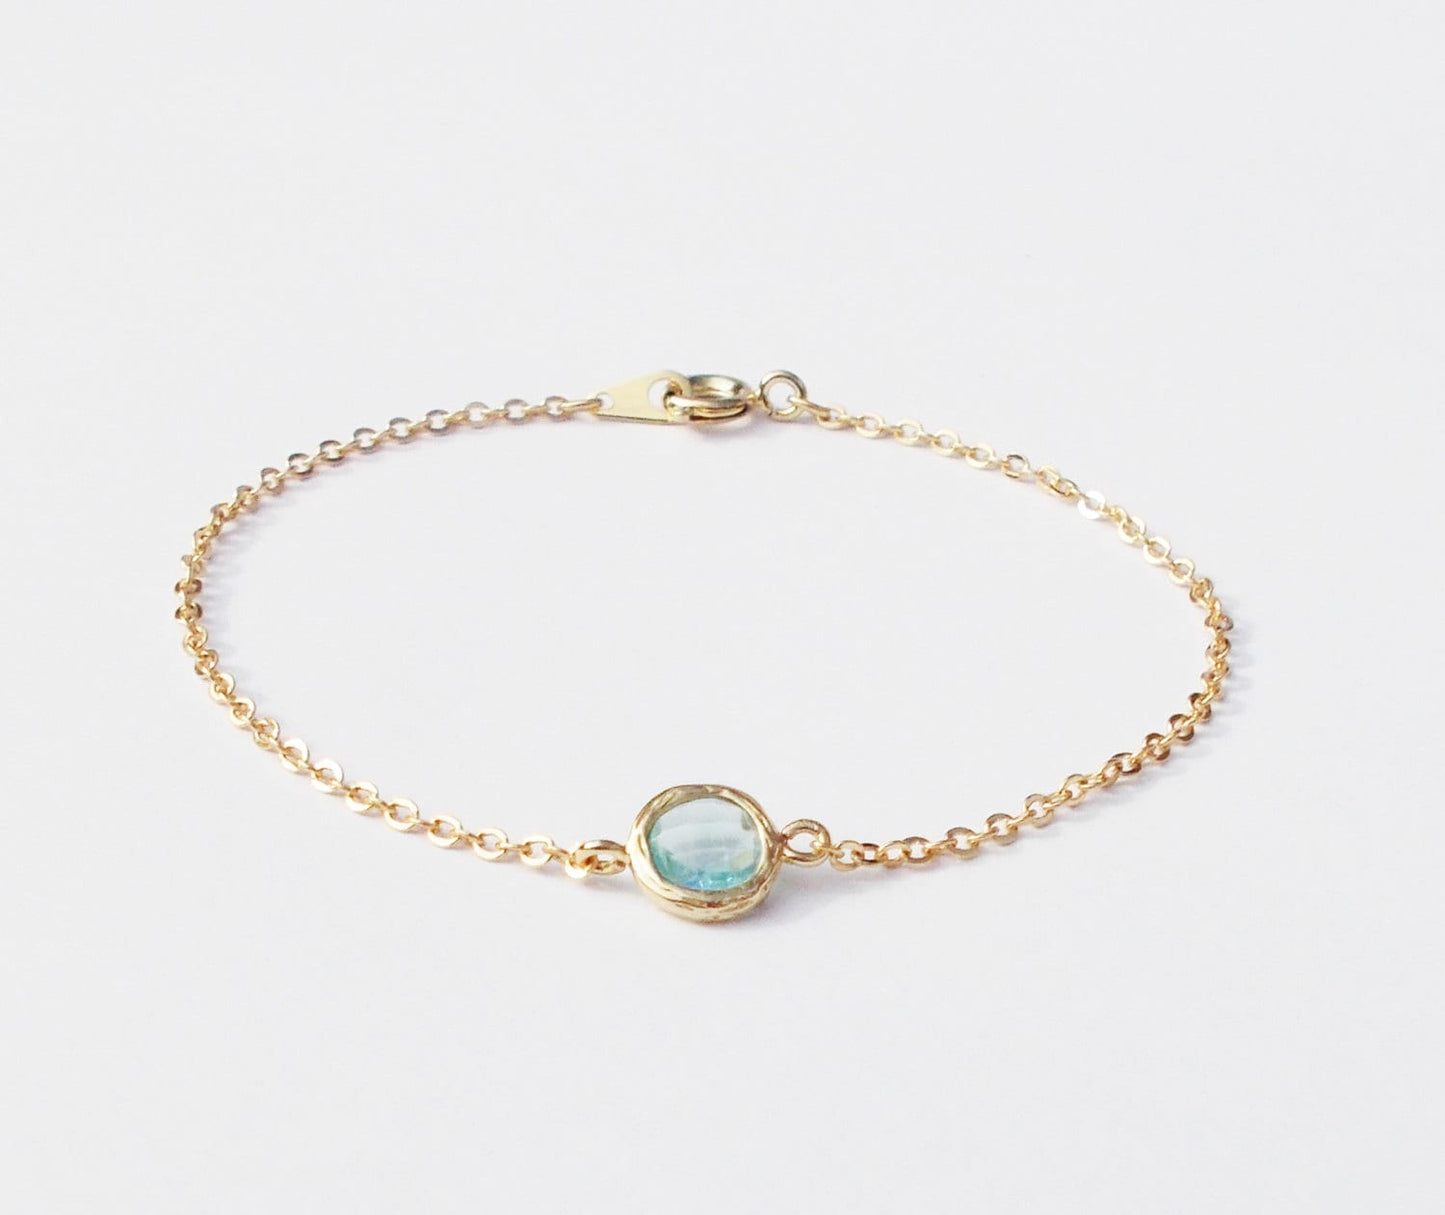 Gold and Aqua Glass Connector Stacking Bracelet - BridesMaid Gift - Gemstone Bracelet - March Birthstone